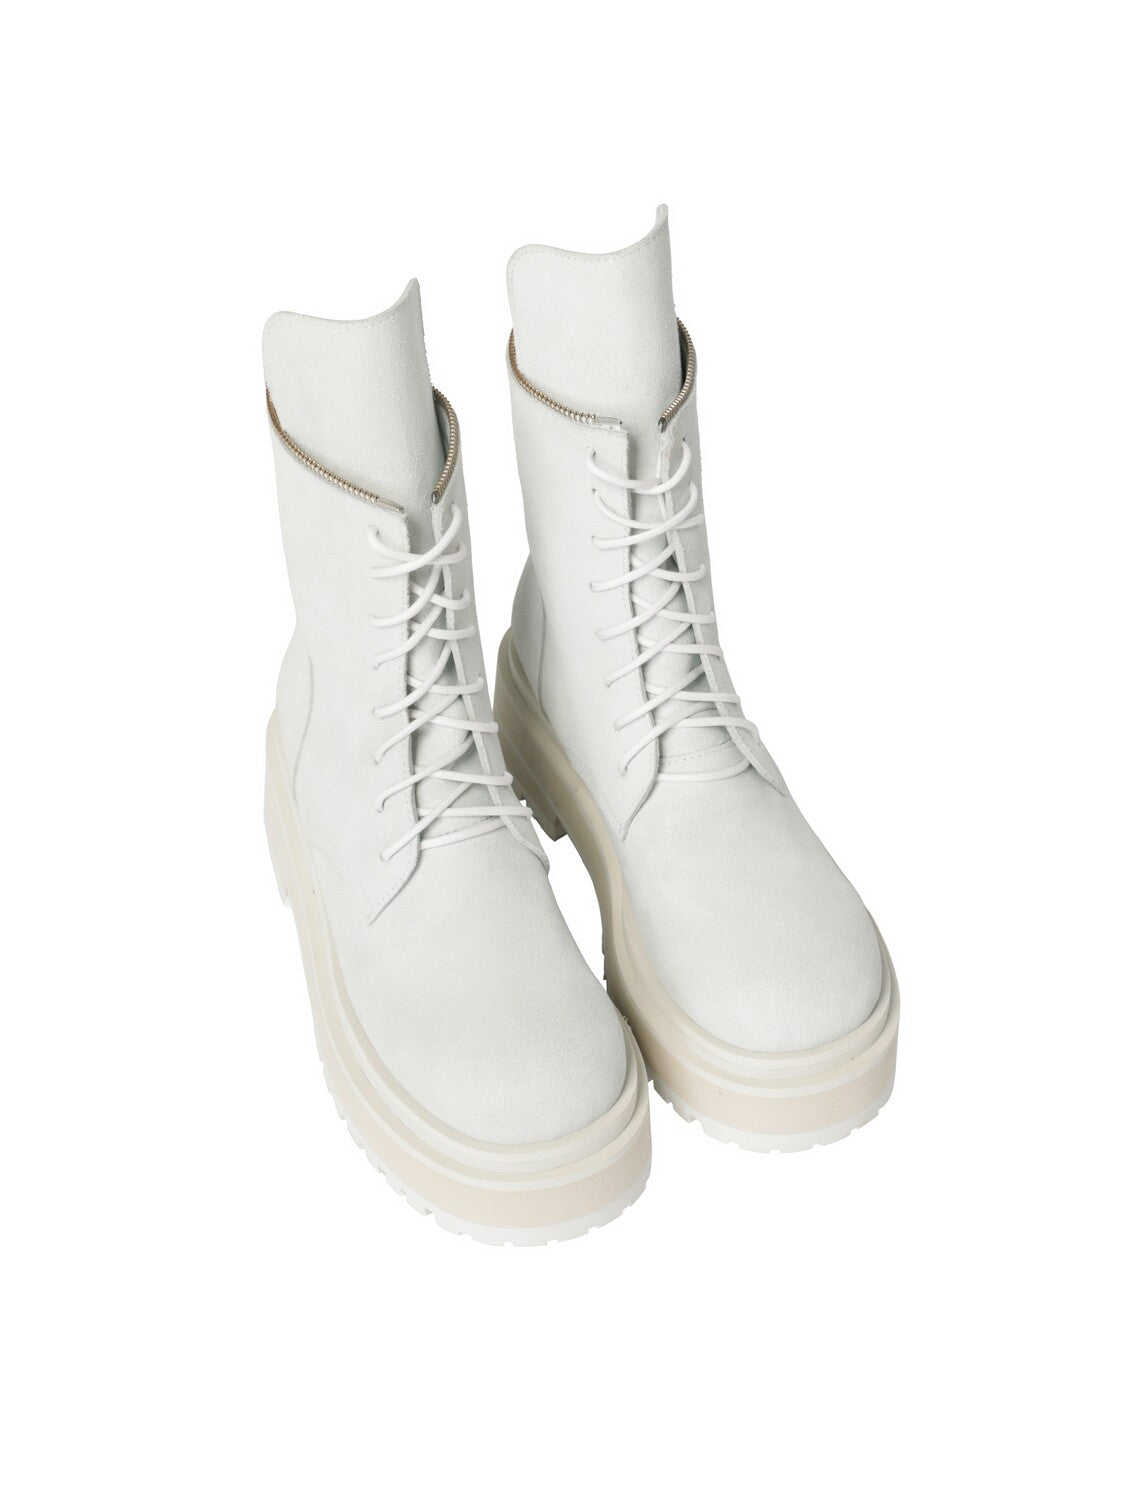 Boots transformers white, 1st height